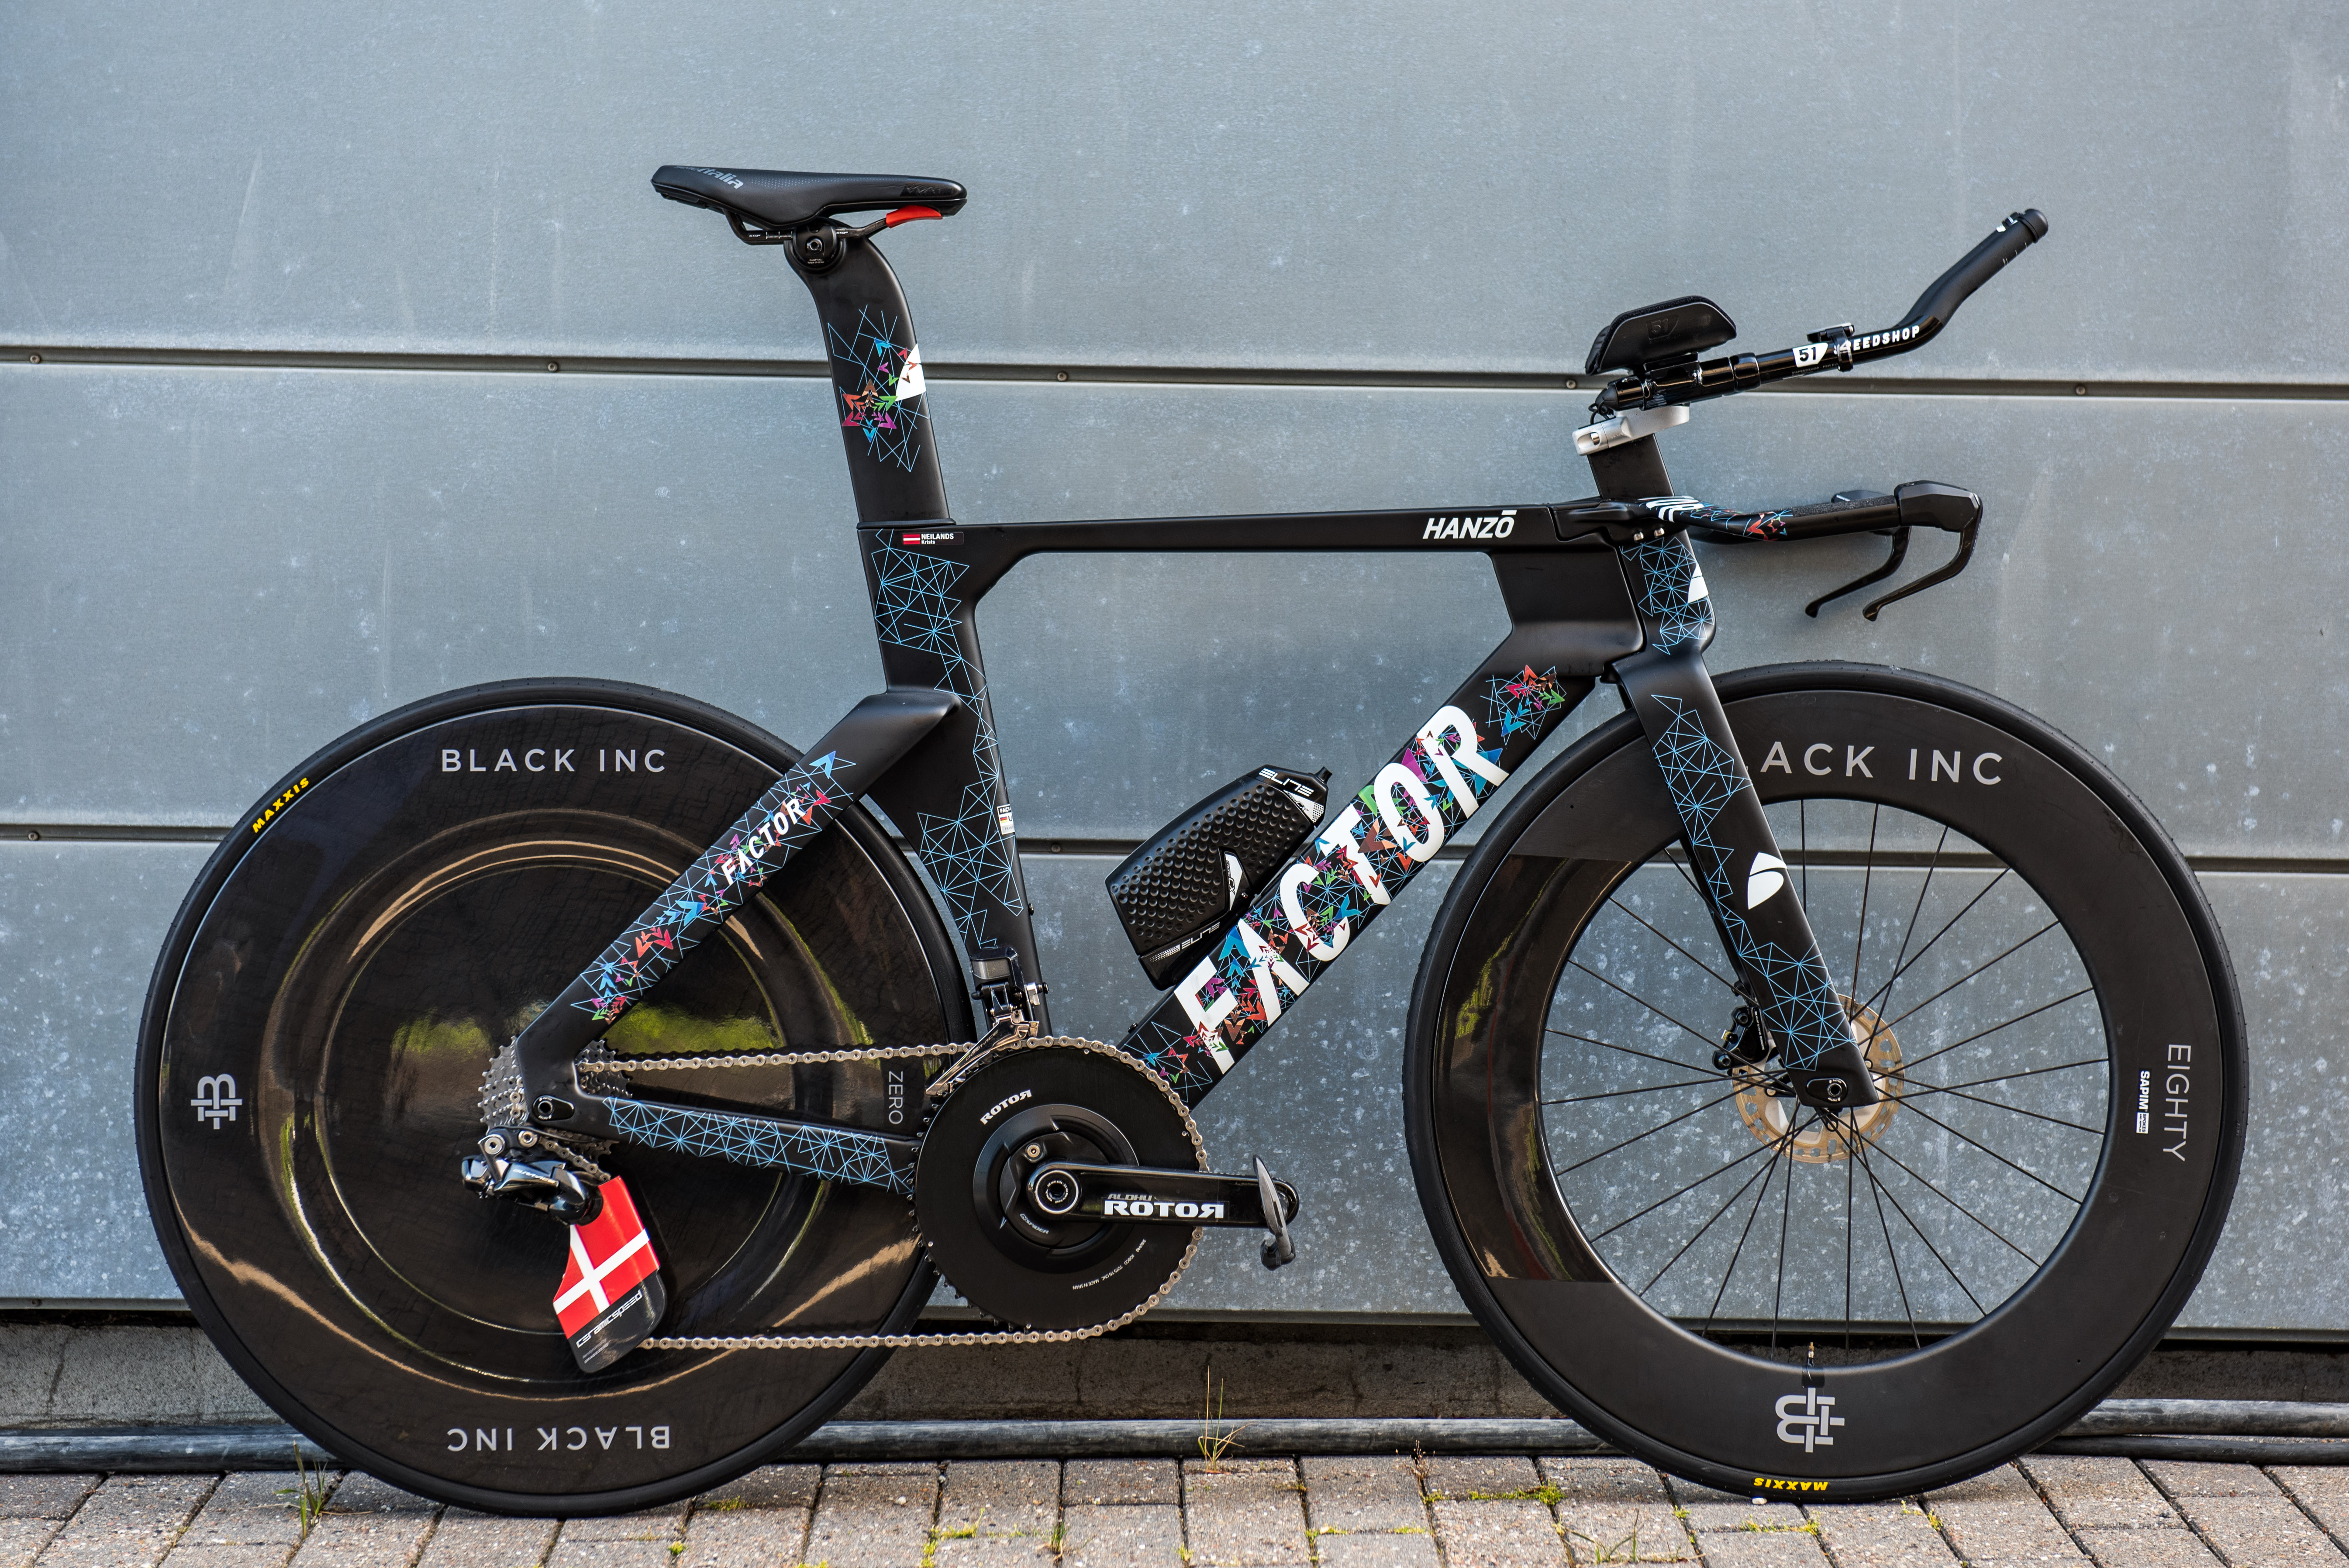 One of the most forward-thinking TT bikes in the peloton? Israel-Premier Tech's new Factor Hanzo